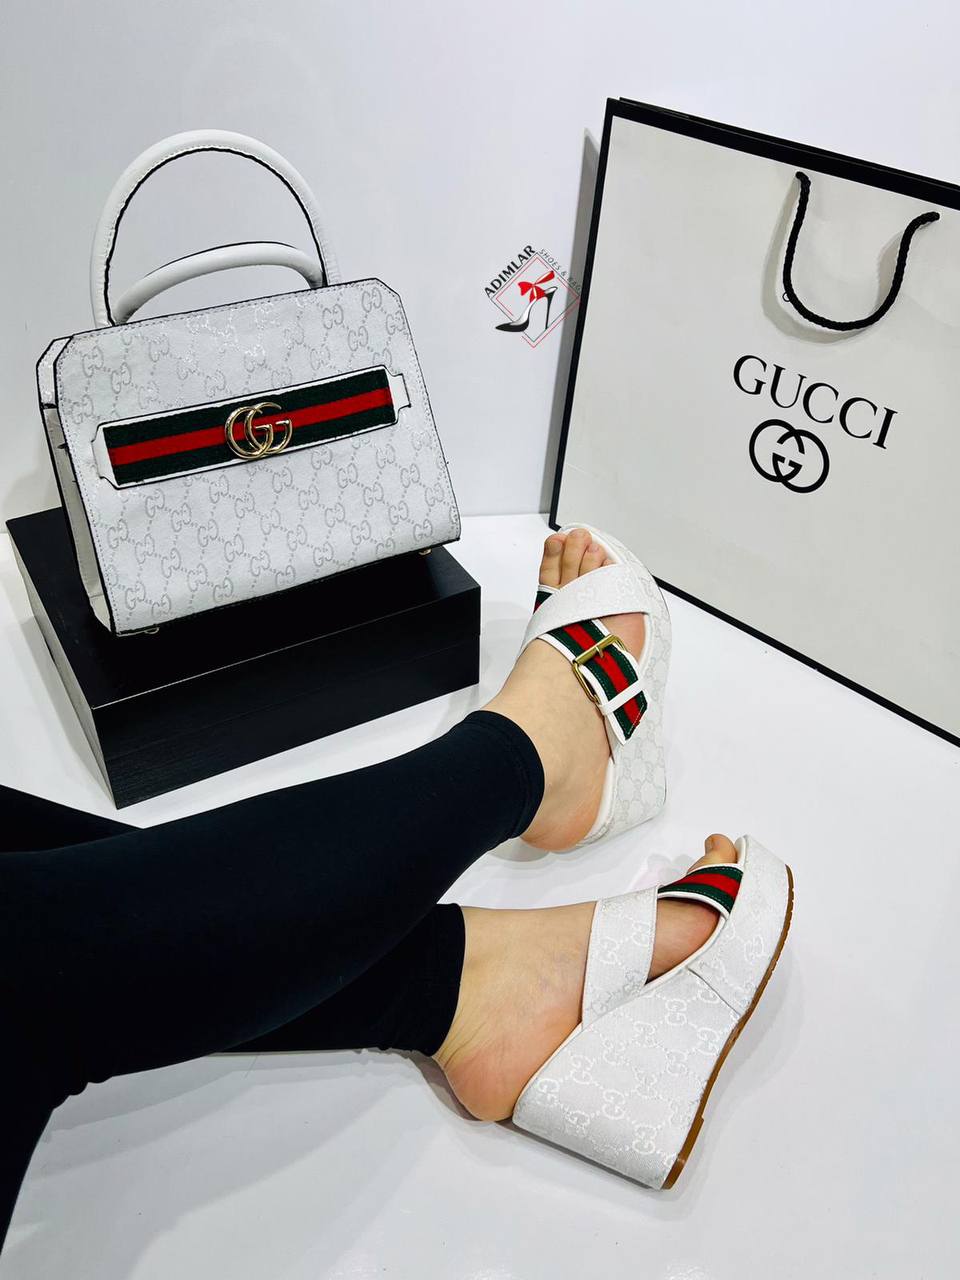 Gucci wedge sandals and handbags